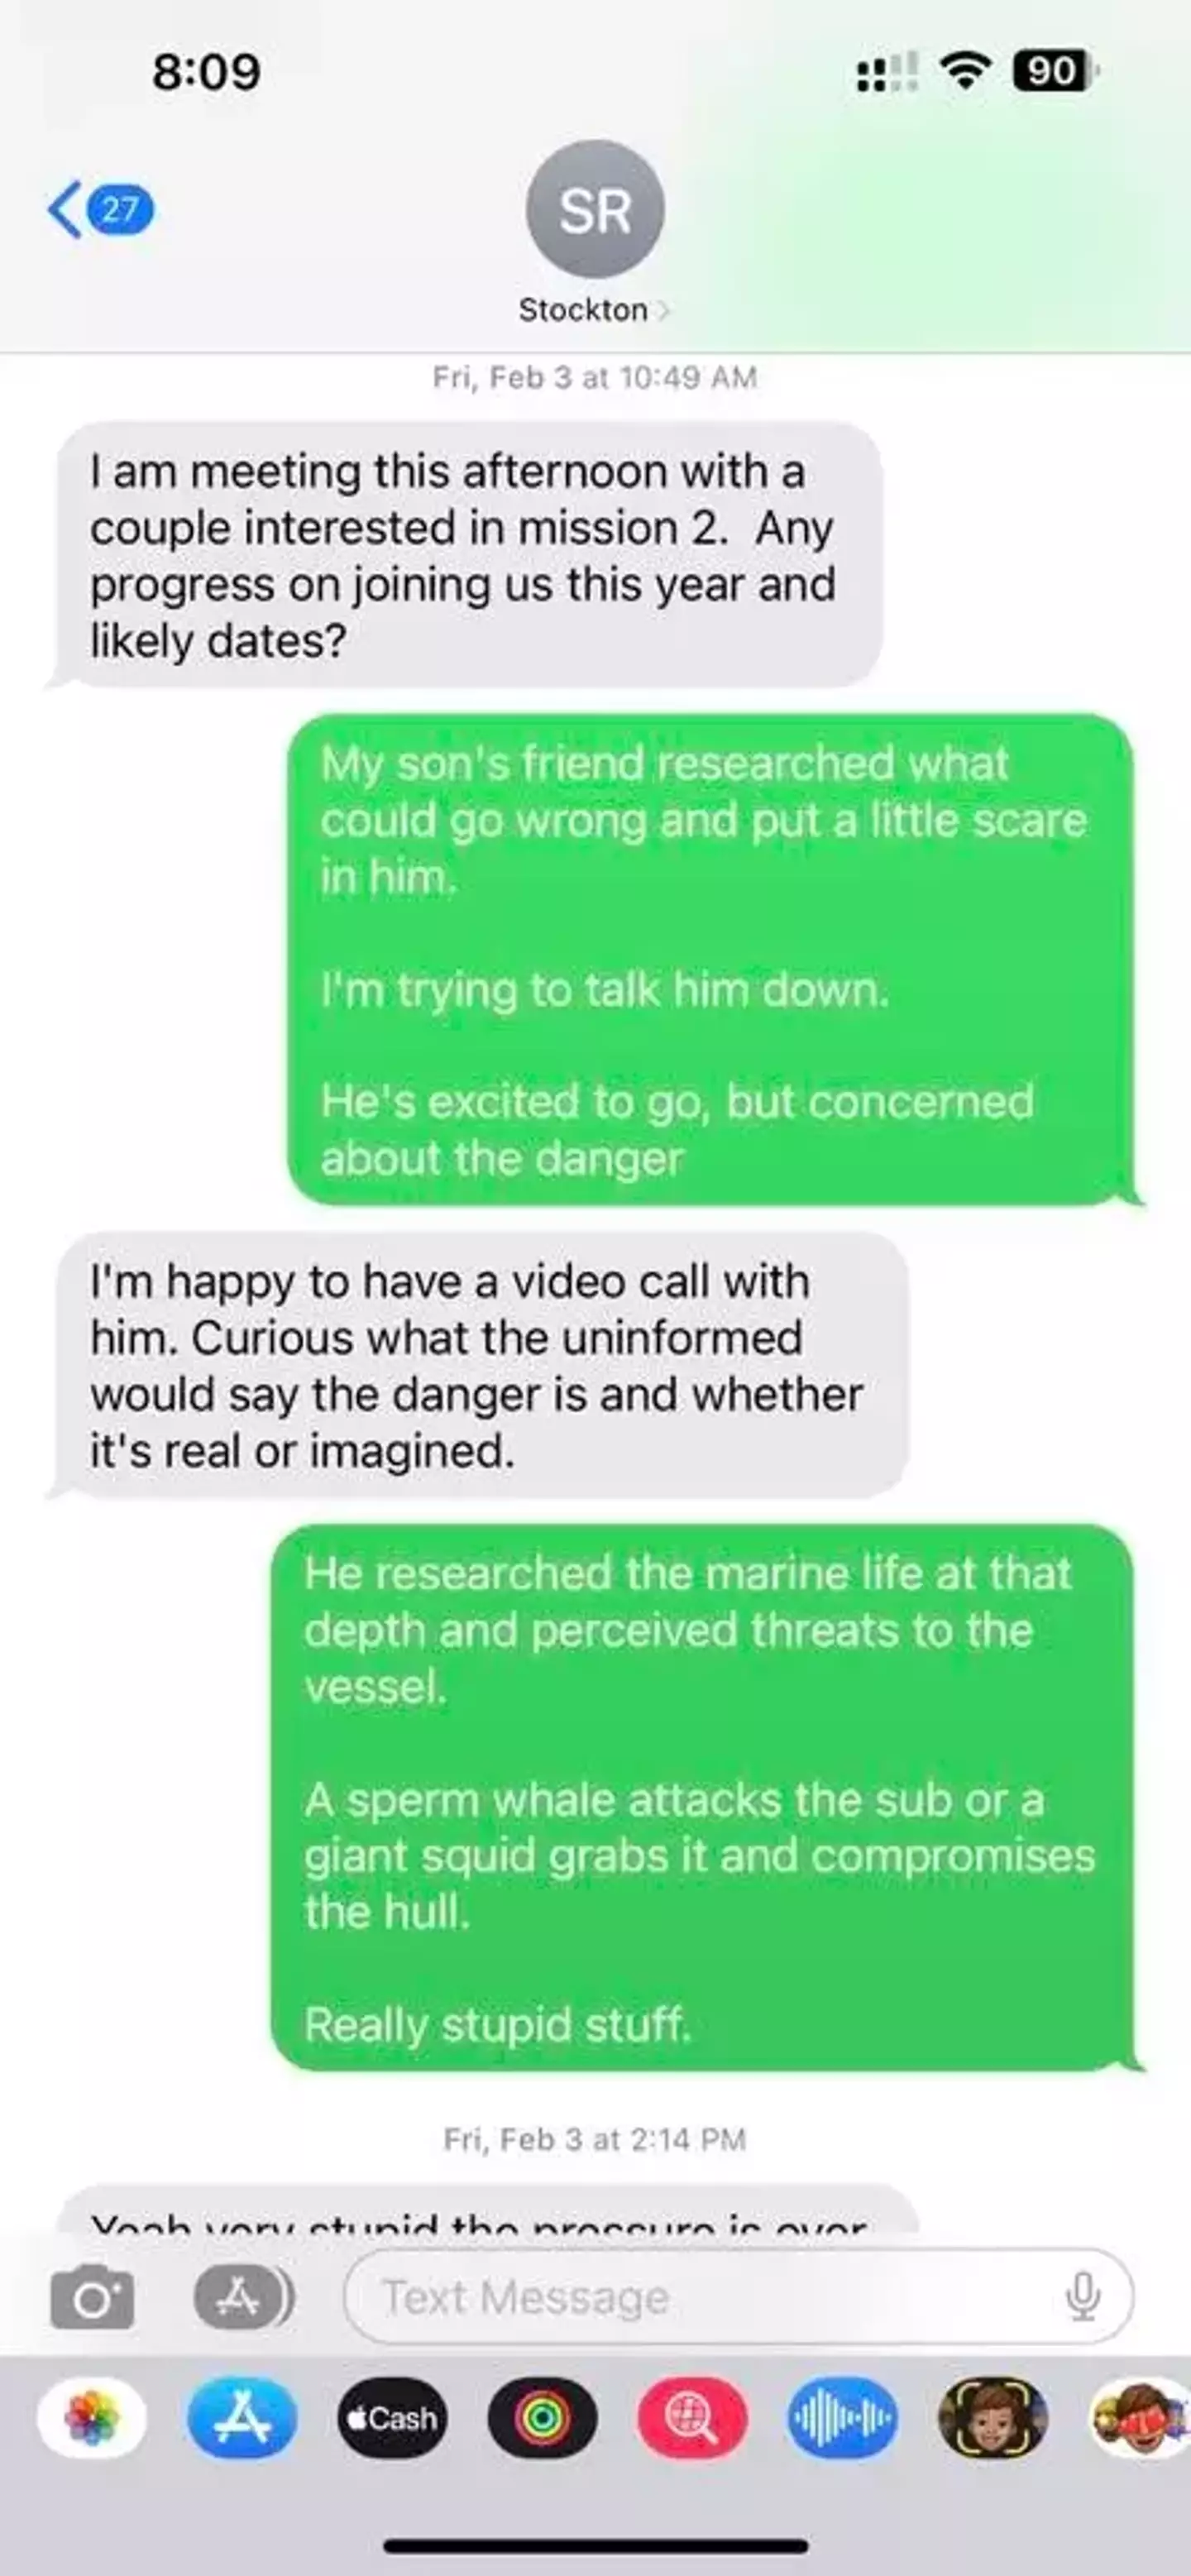 In one exchange of messages he mentioned that his son was scared of the dangers.